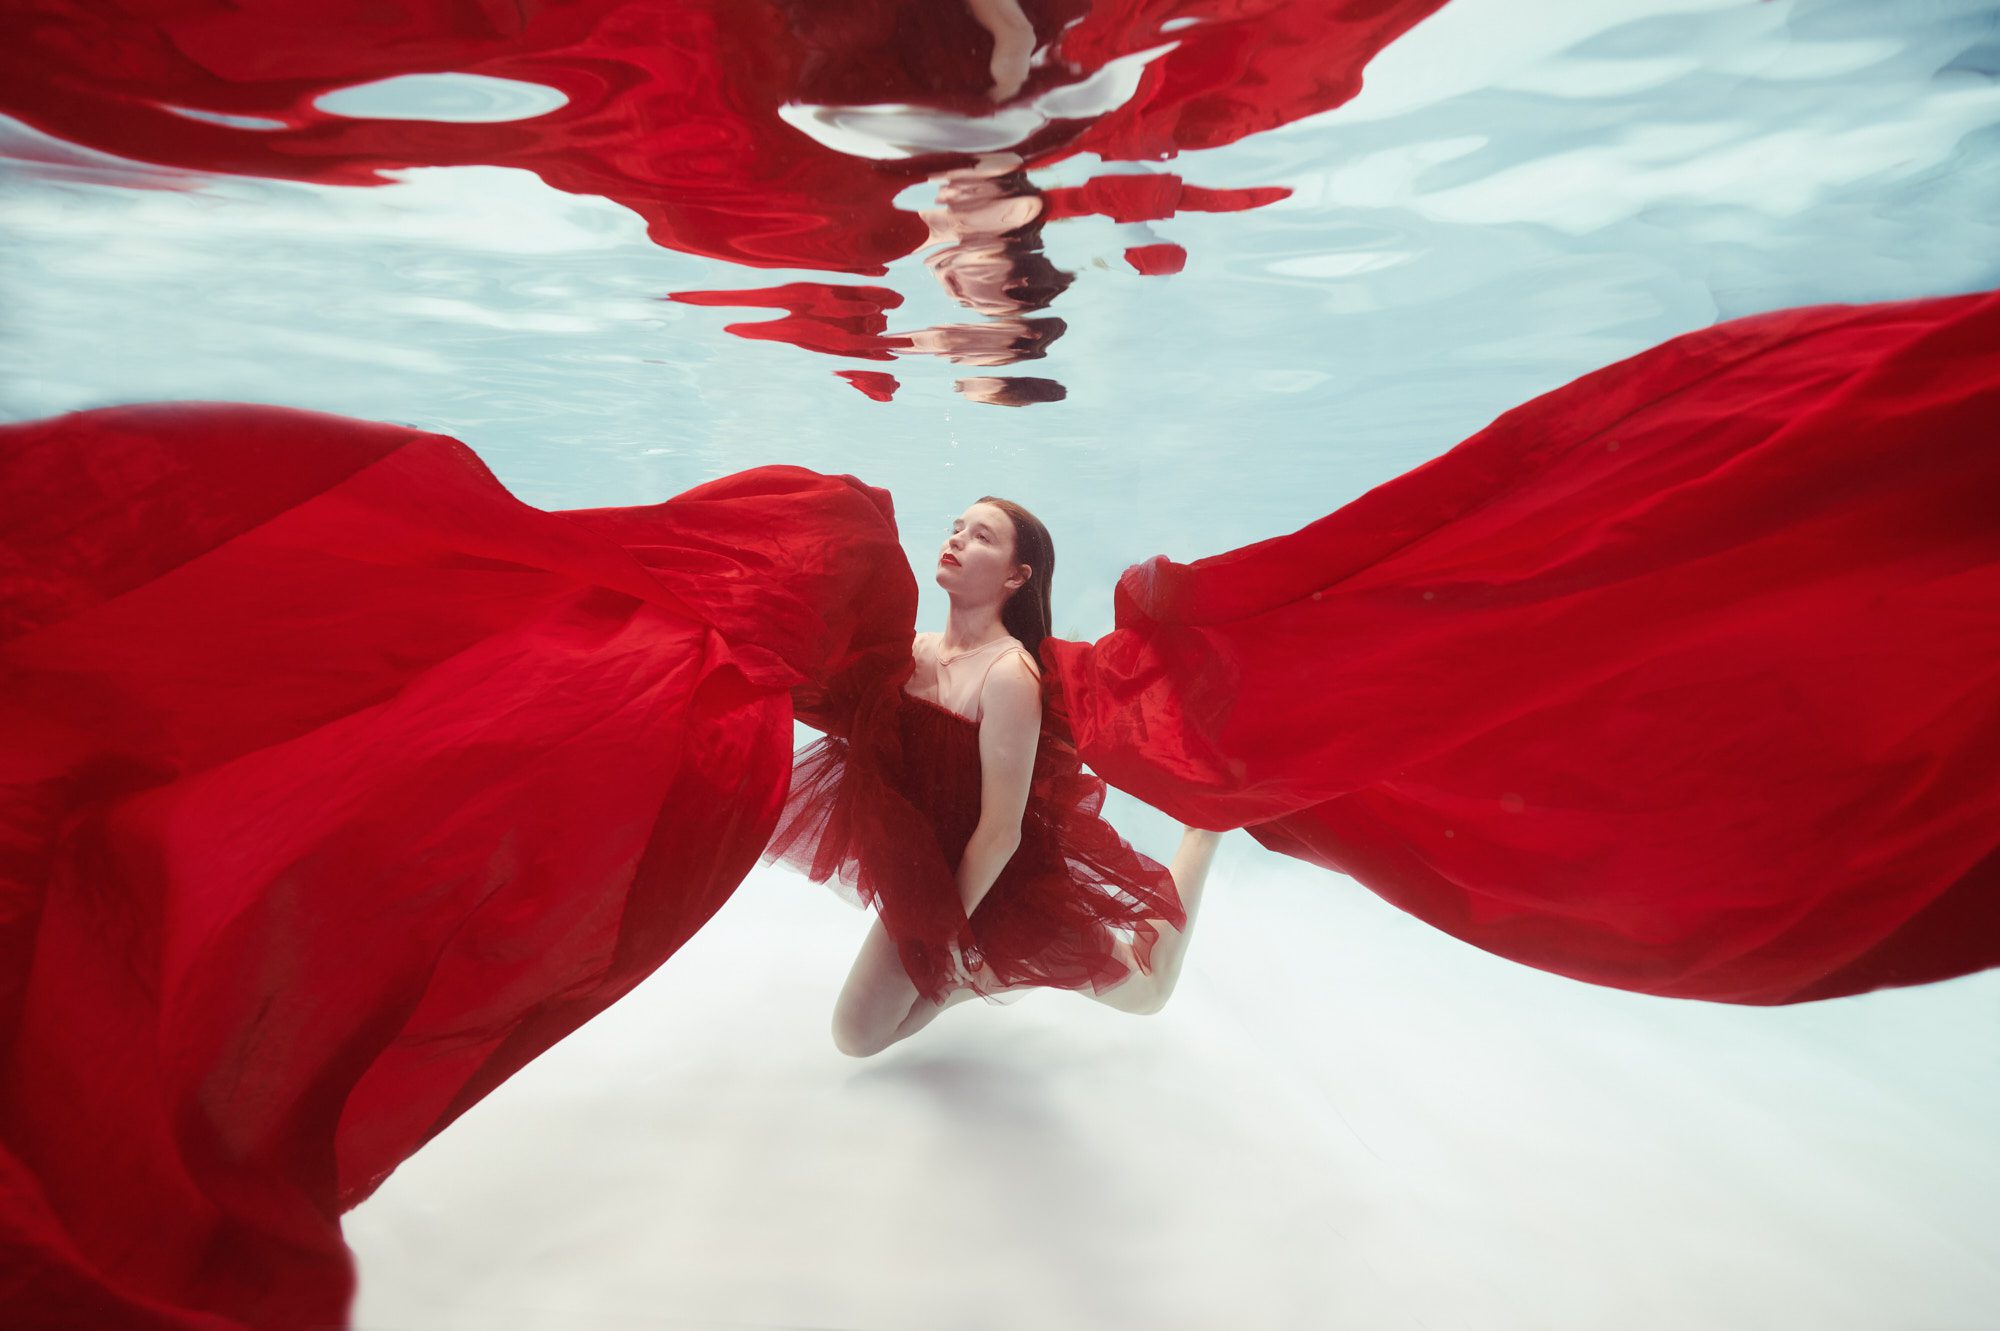 Model floating underwater in Red fabric